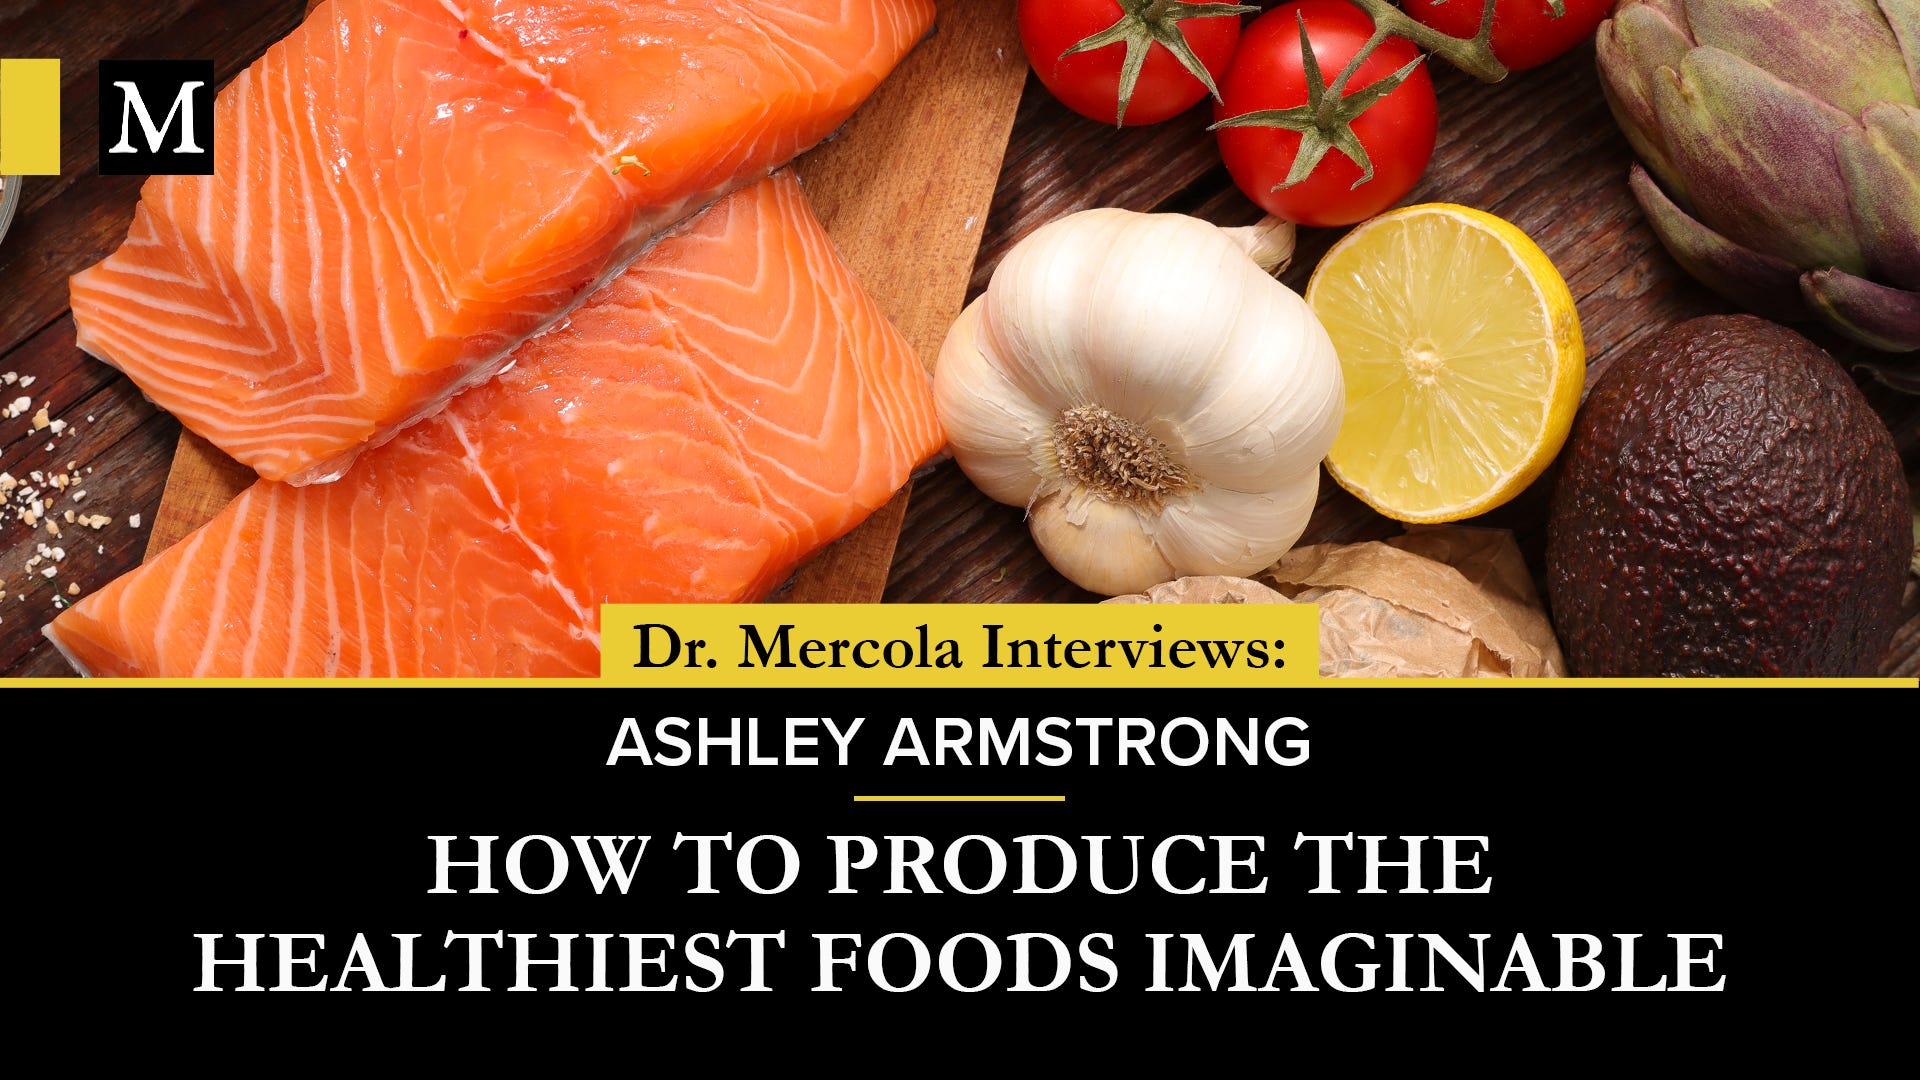 How To Produce The Healthiest Foods Imaginable